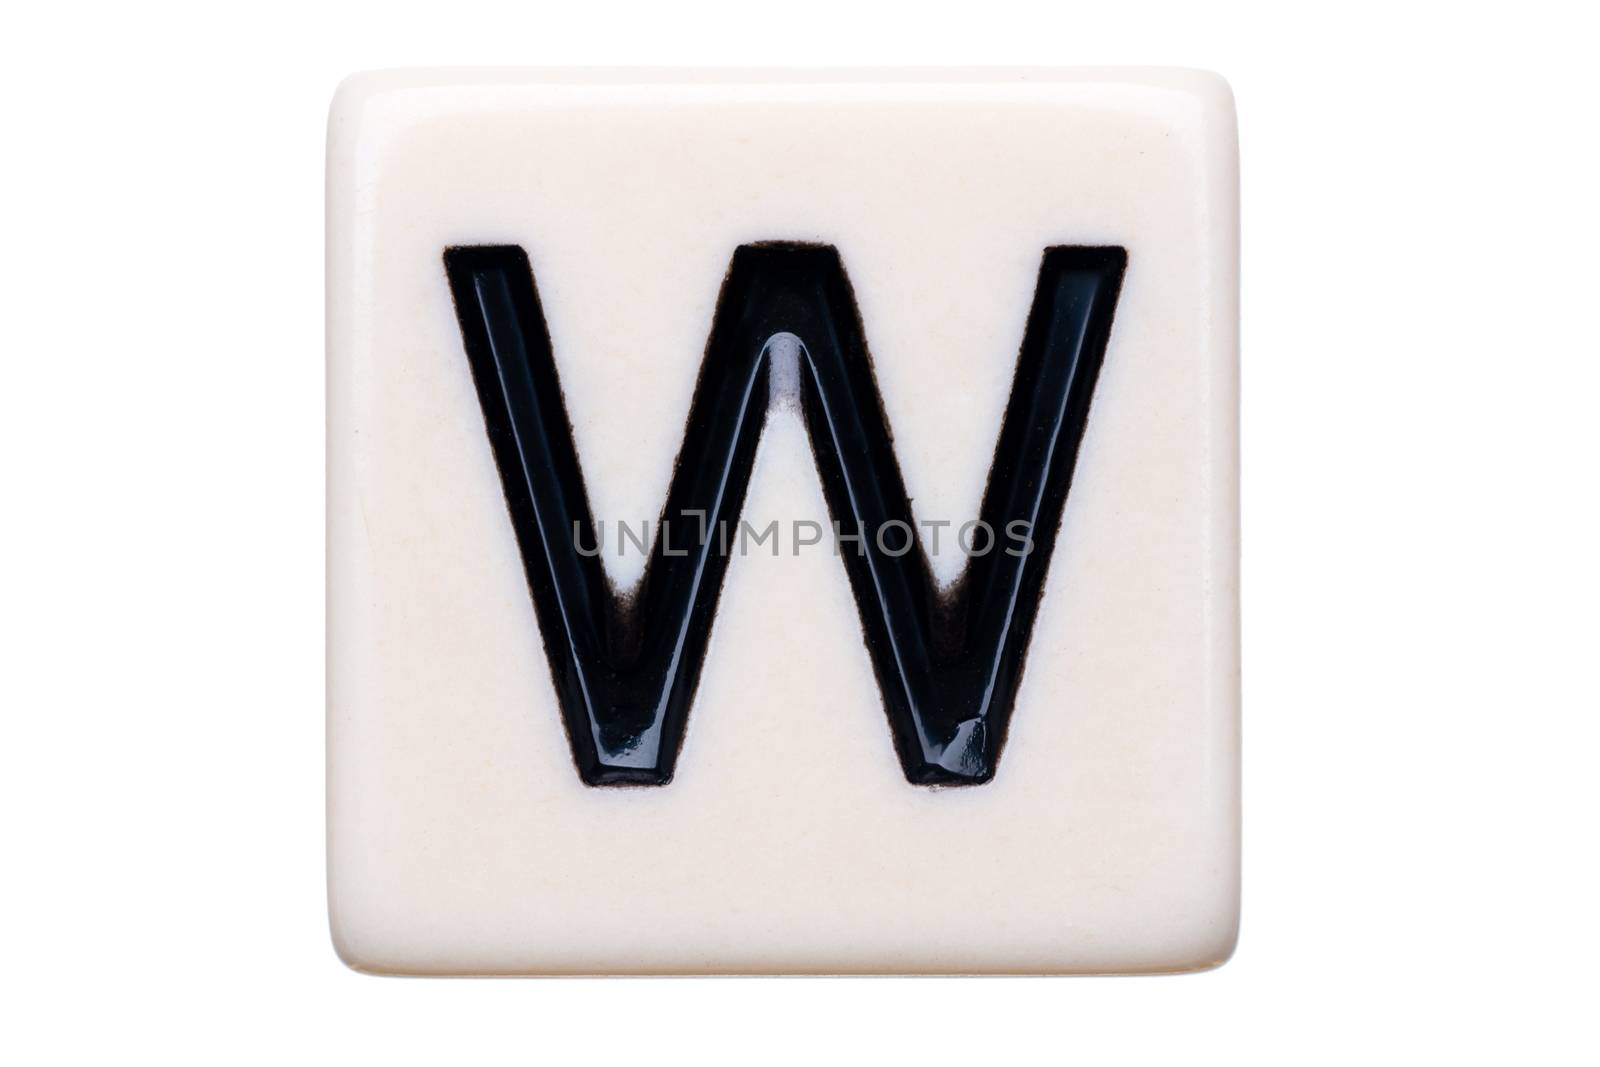 A macro shot of a game tile with the letter W on it on a white background.